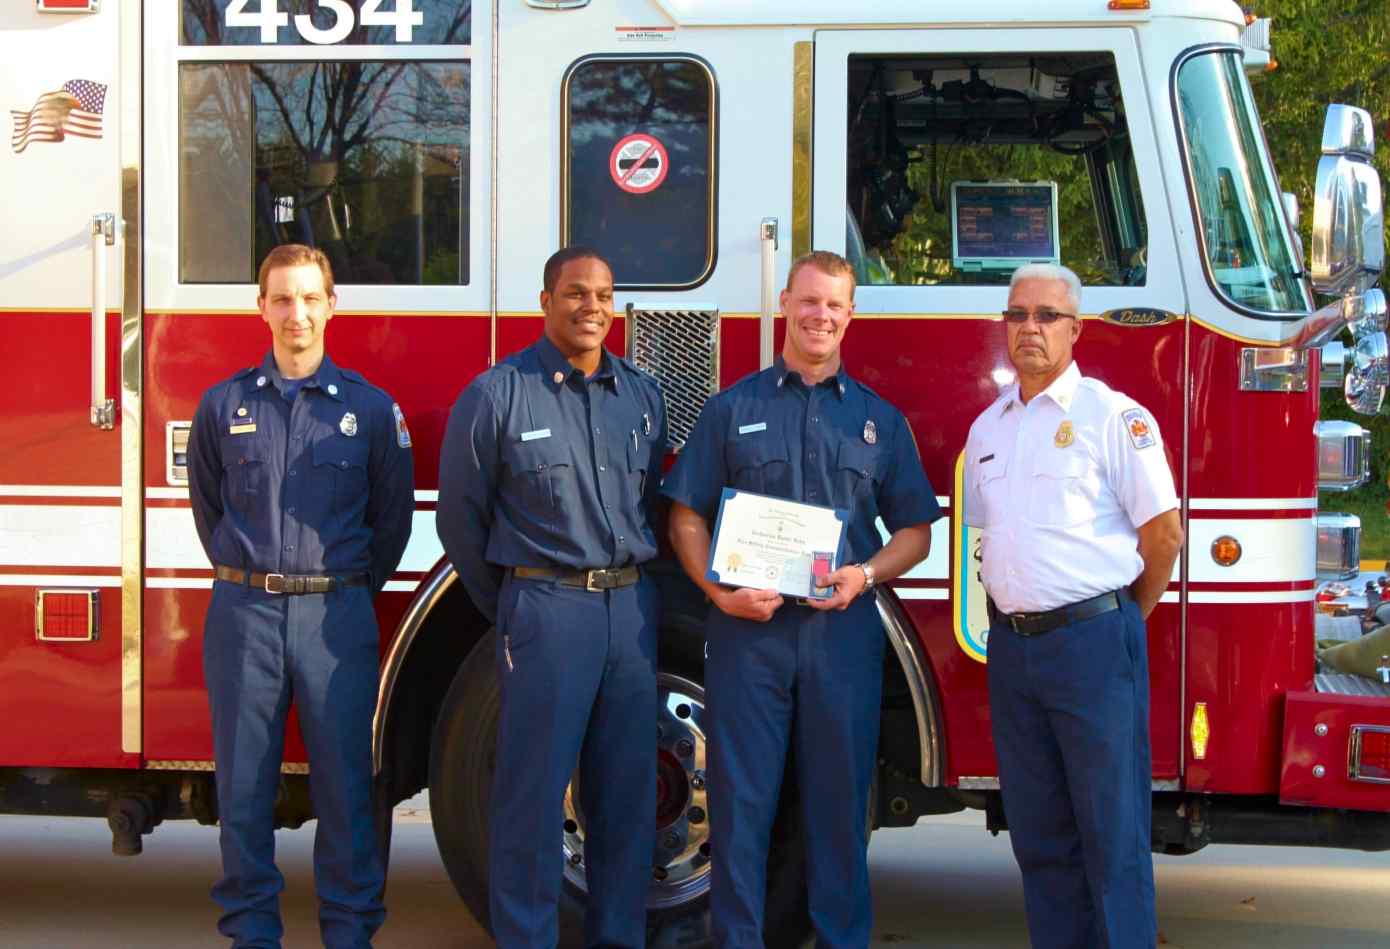 Dan Hahn displays his Fire Safety Commendation Medal and certificate with members of Fire Station 34